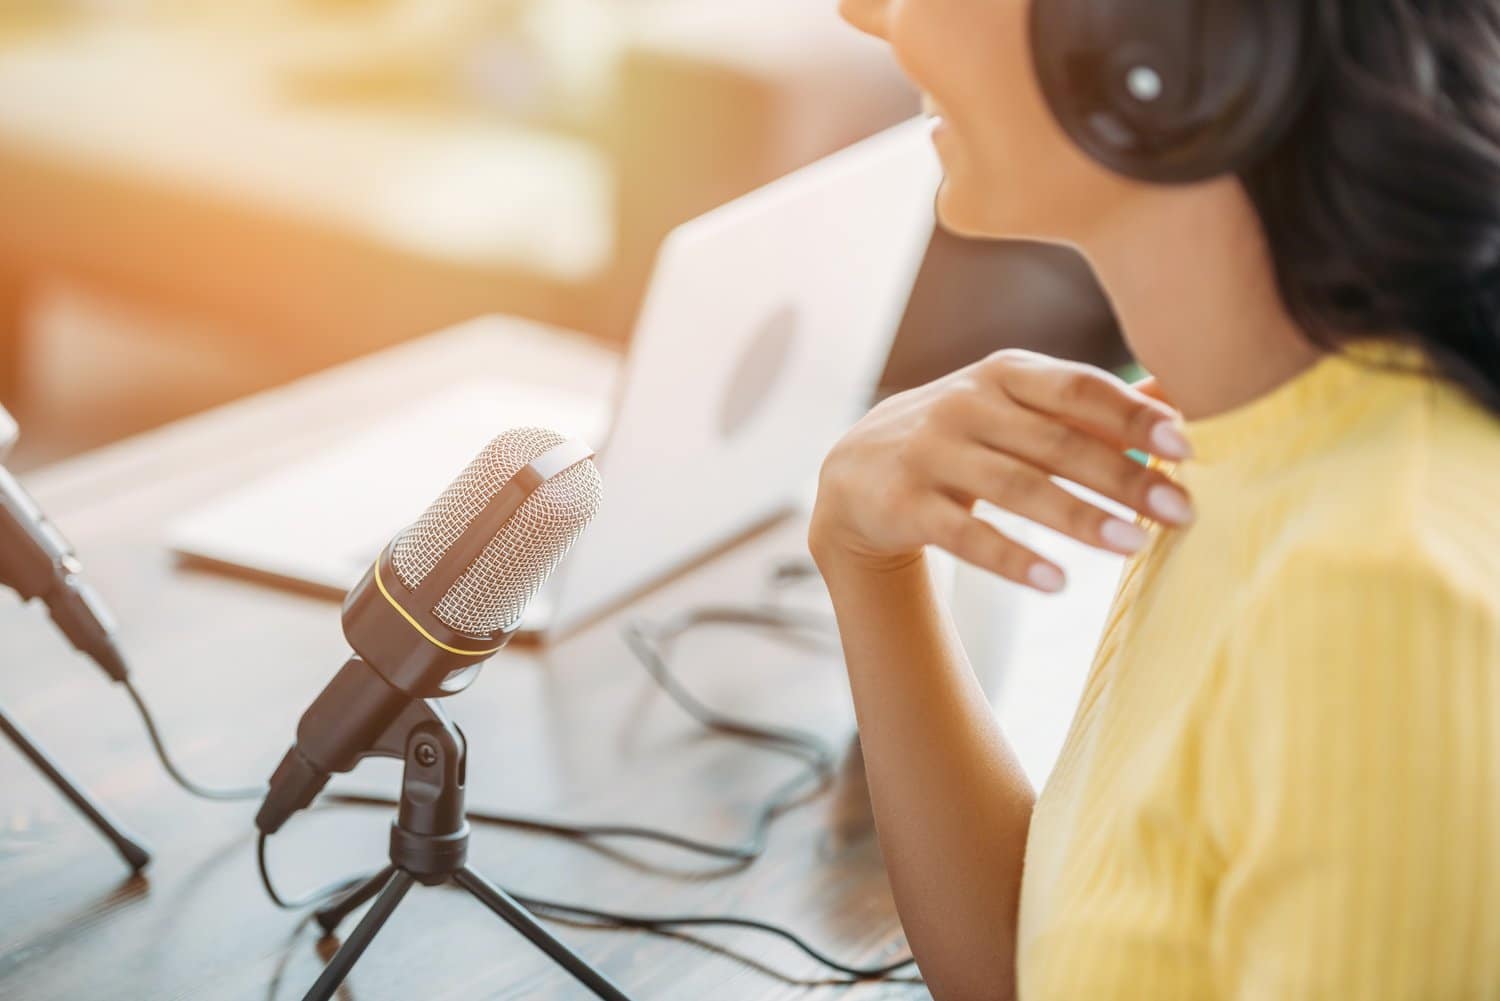 Top Personal Finance Podcasts